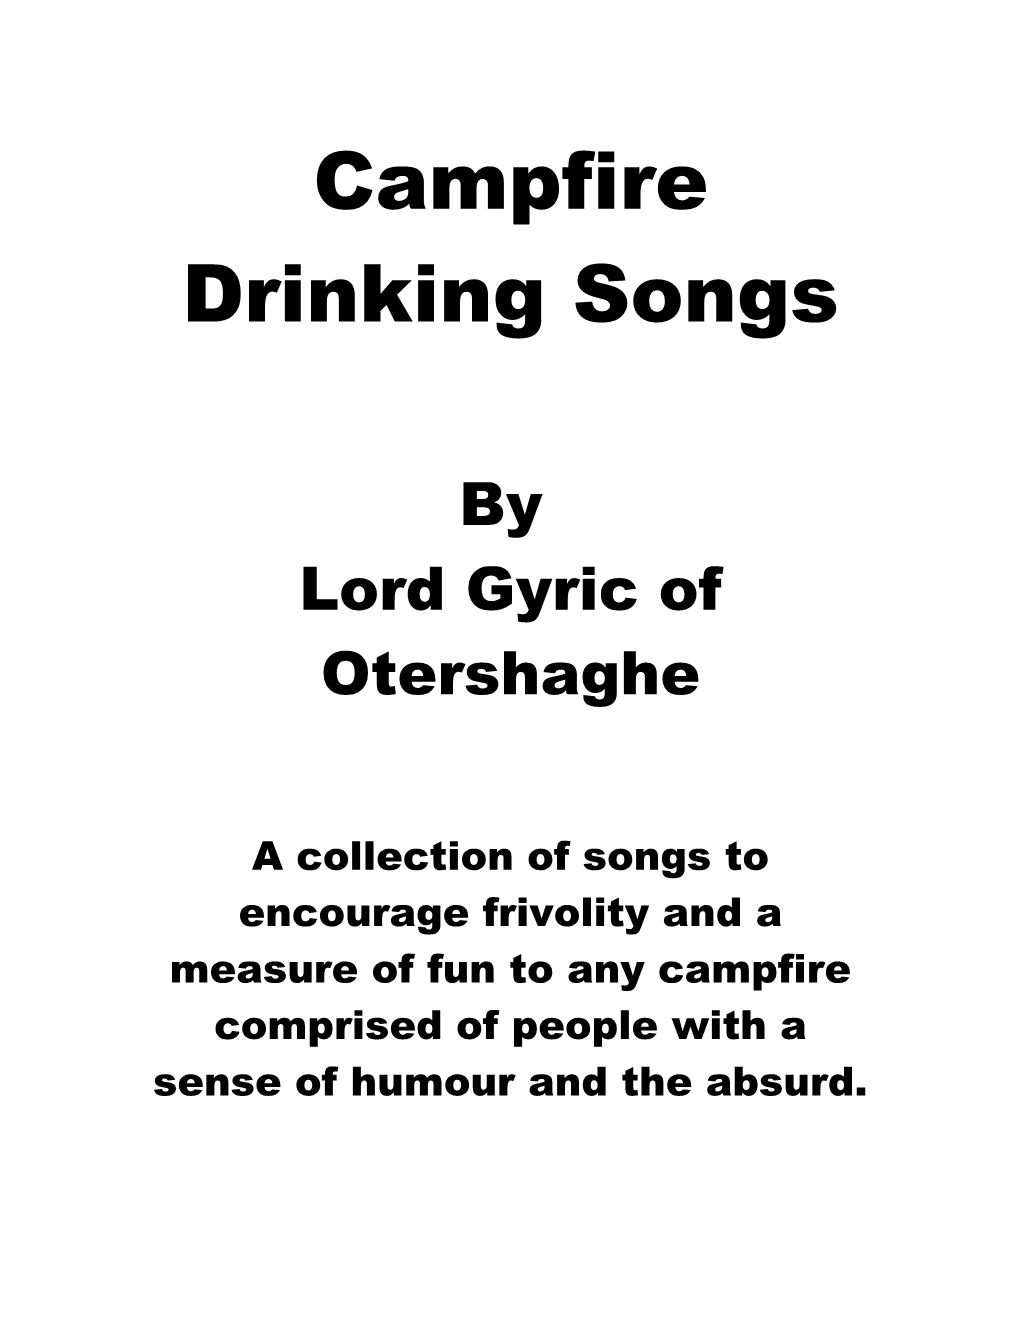 Campfire Drinking Songs